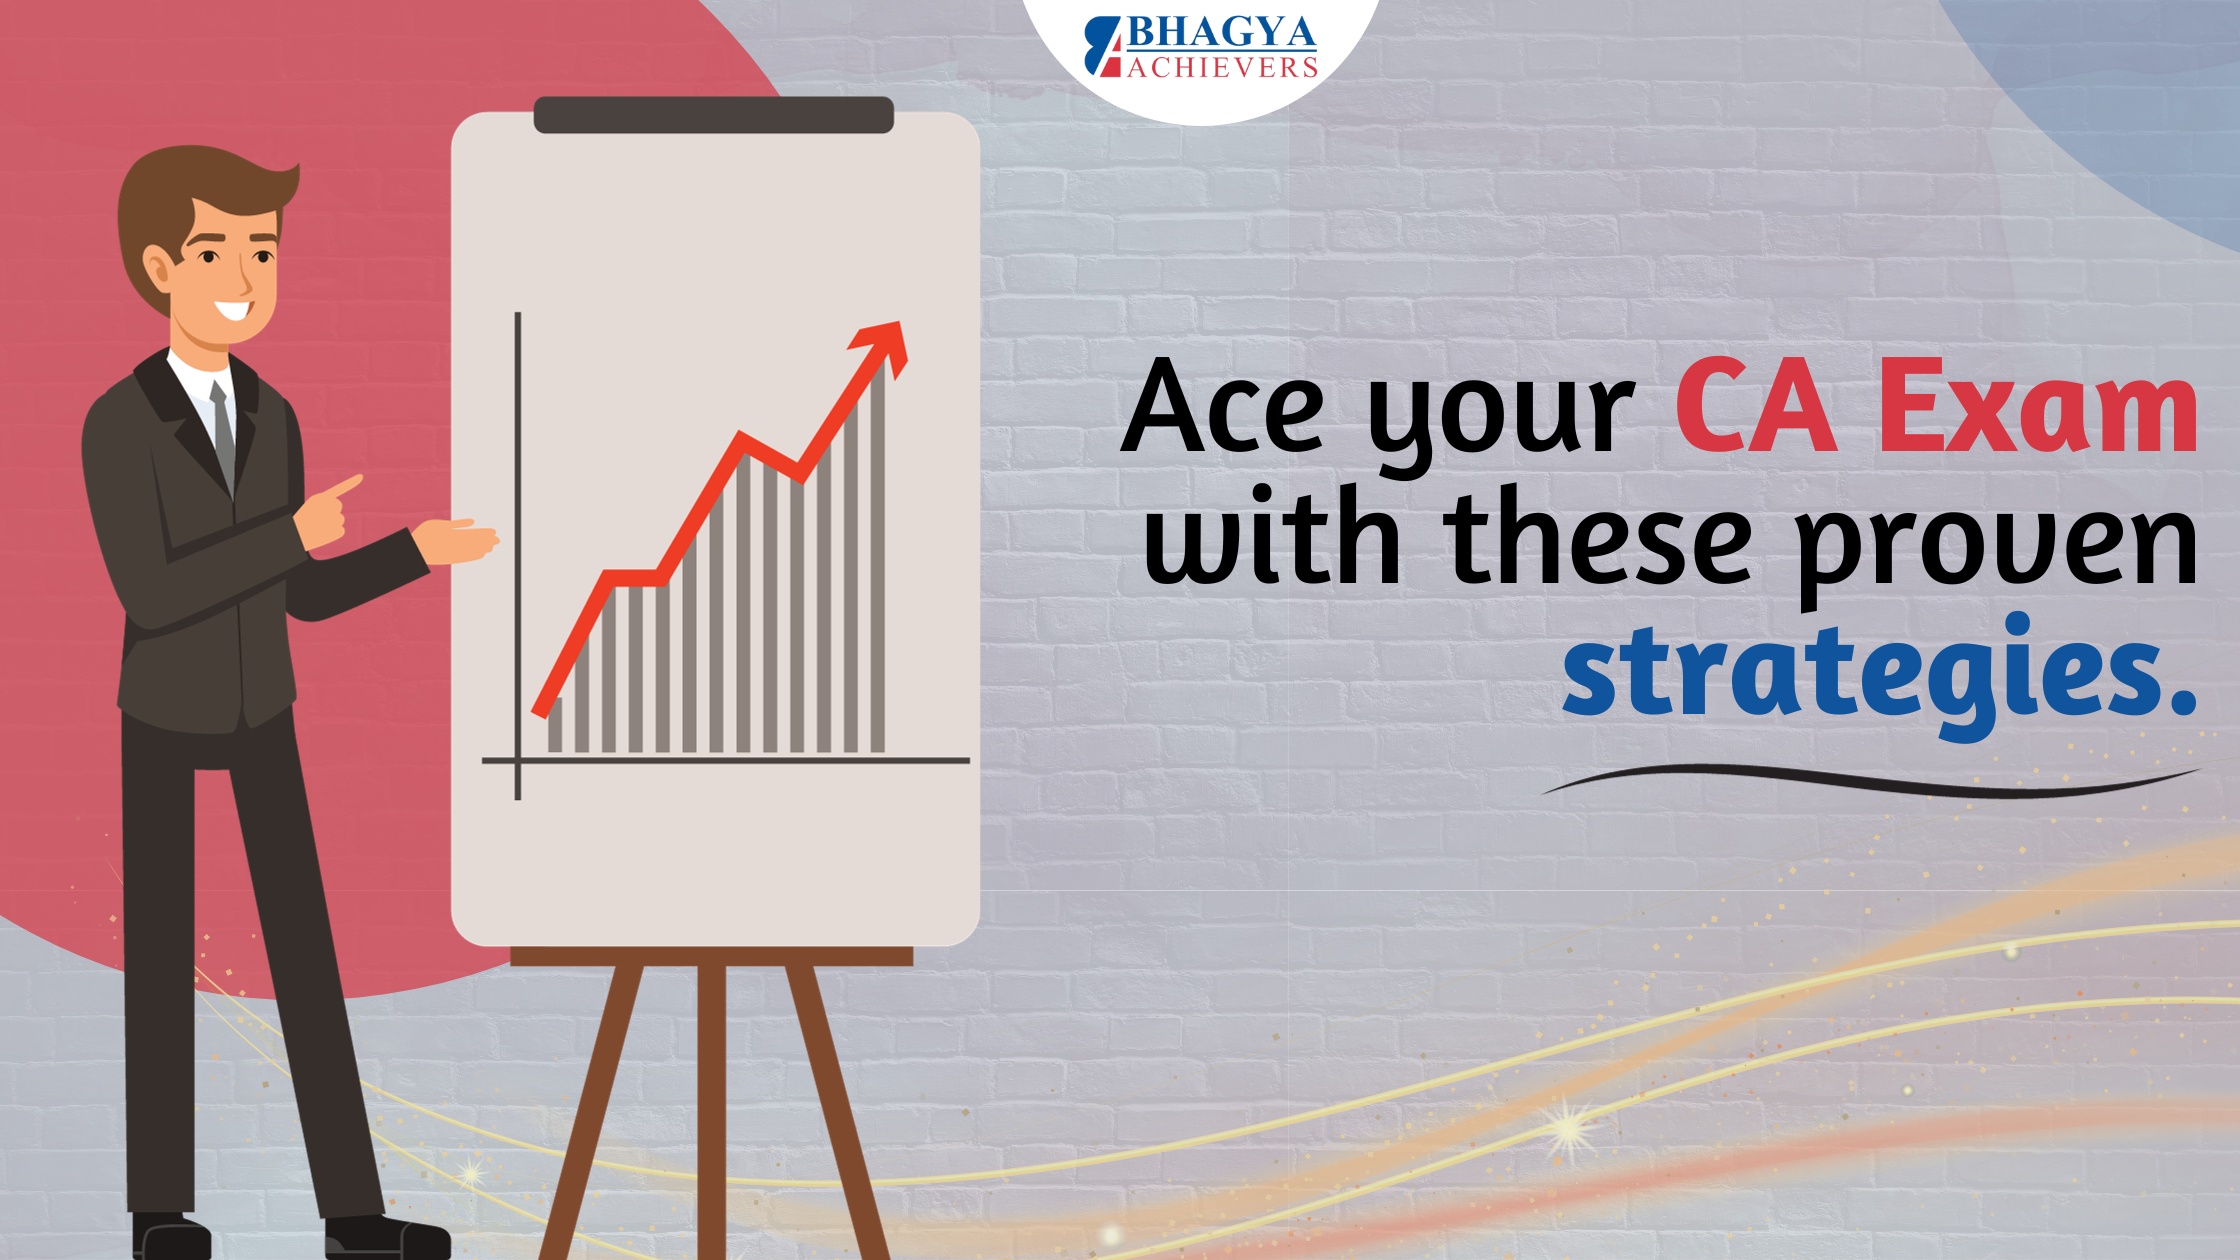 Ace Your CA Exam with These Proven Test Series Strategies - Bhagya Achievers